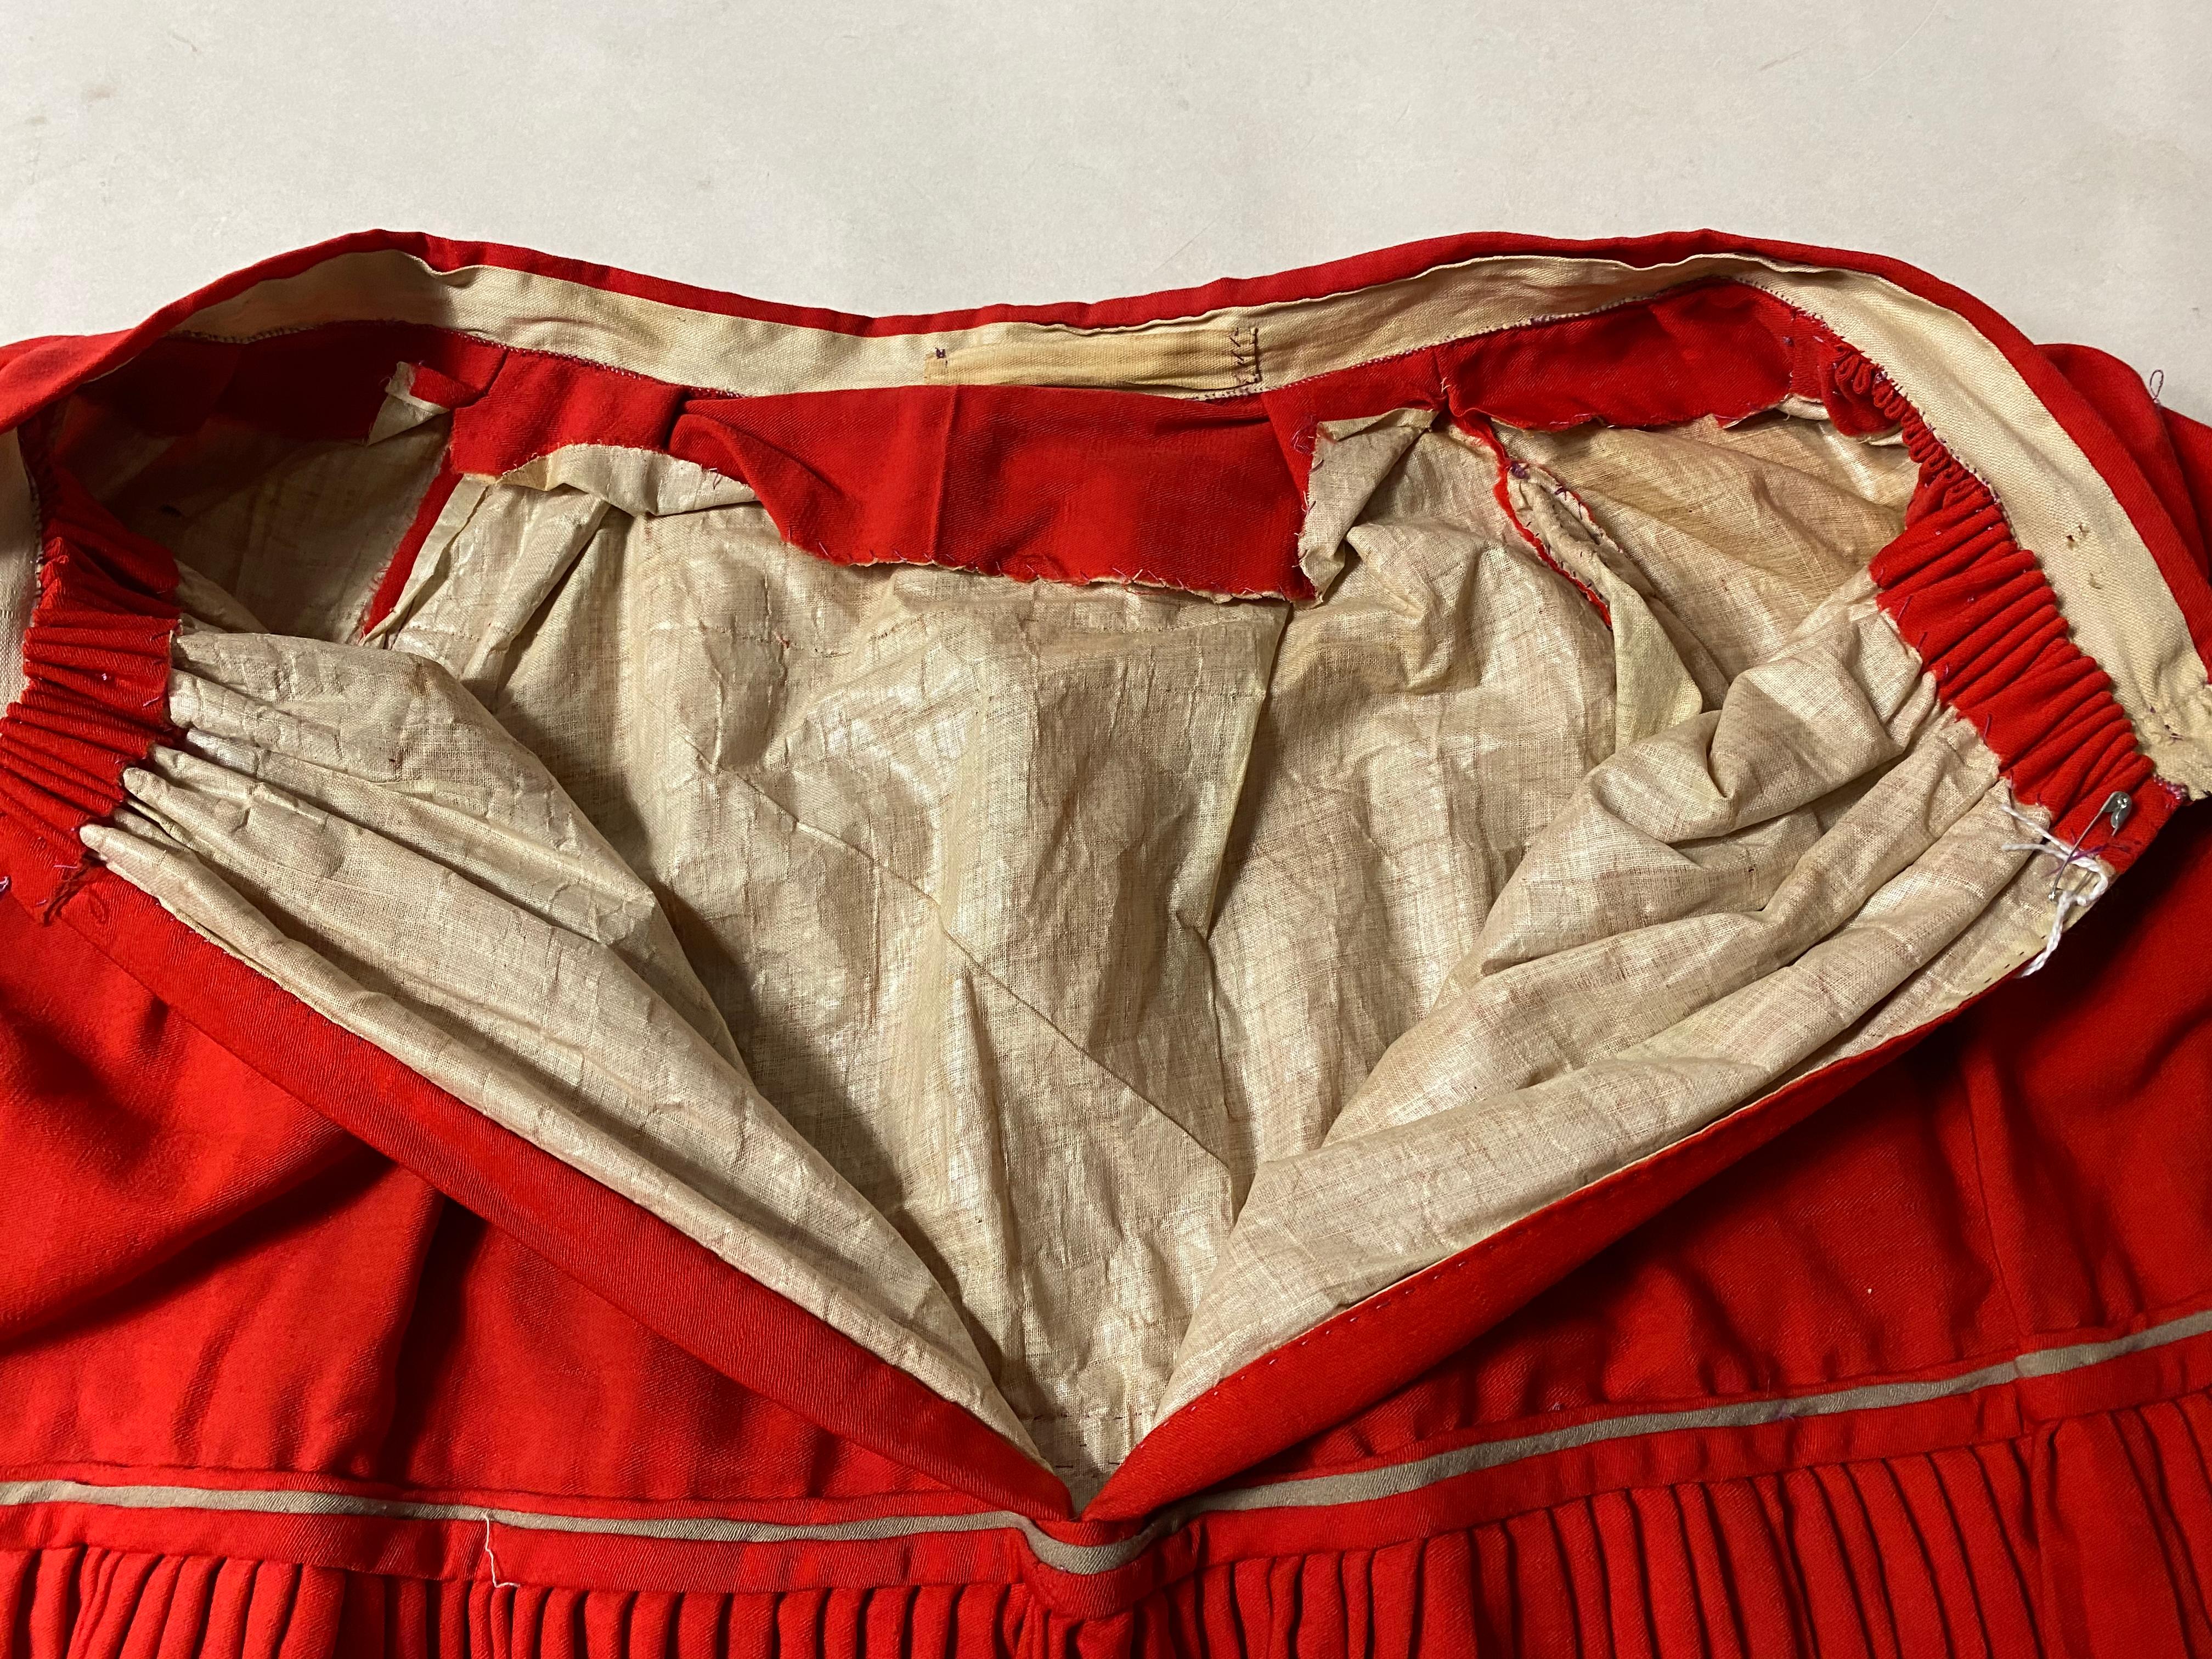 An Historical Circus, Fancy or Memorial Dress in Scarlet Challis USA Circa 1890 For Sale 8